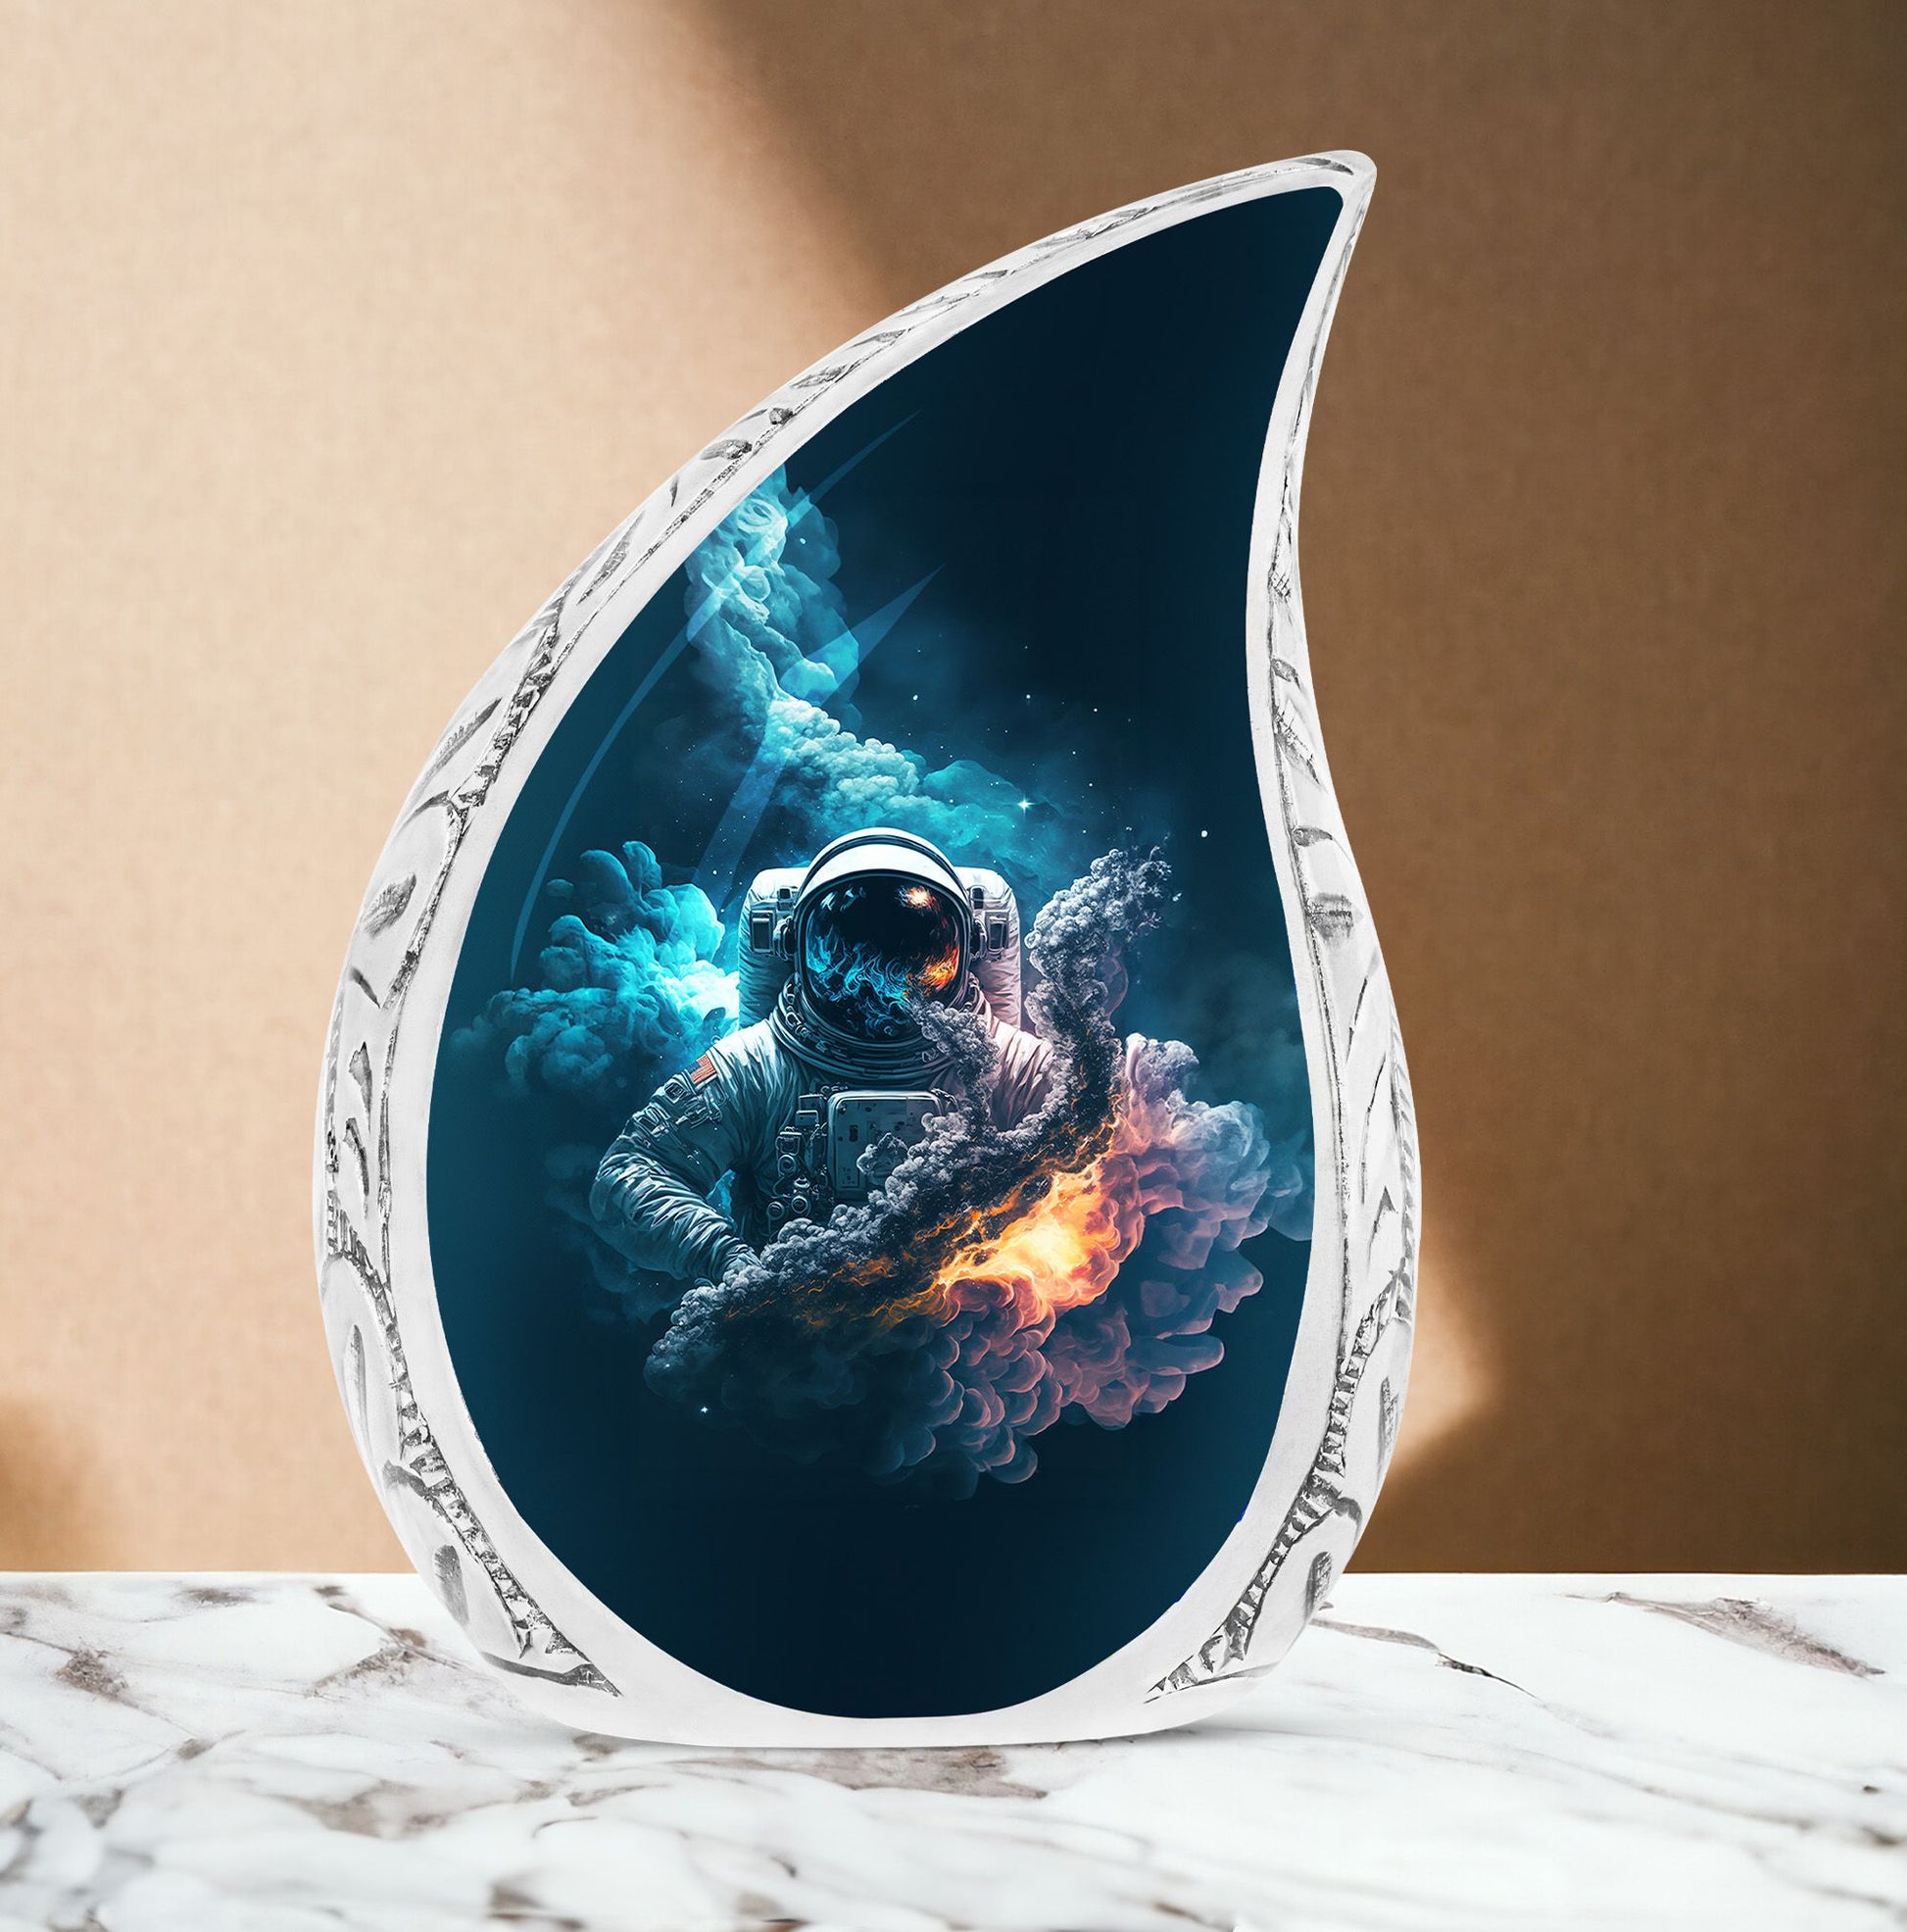 Unique large urn for mother's ashes with astronaut space double exposure design, perfect for burial or decorative use